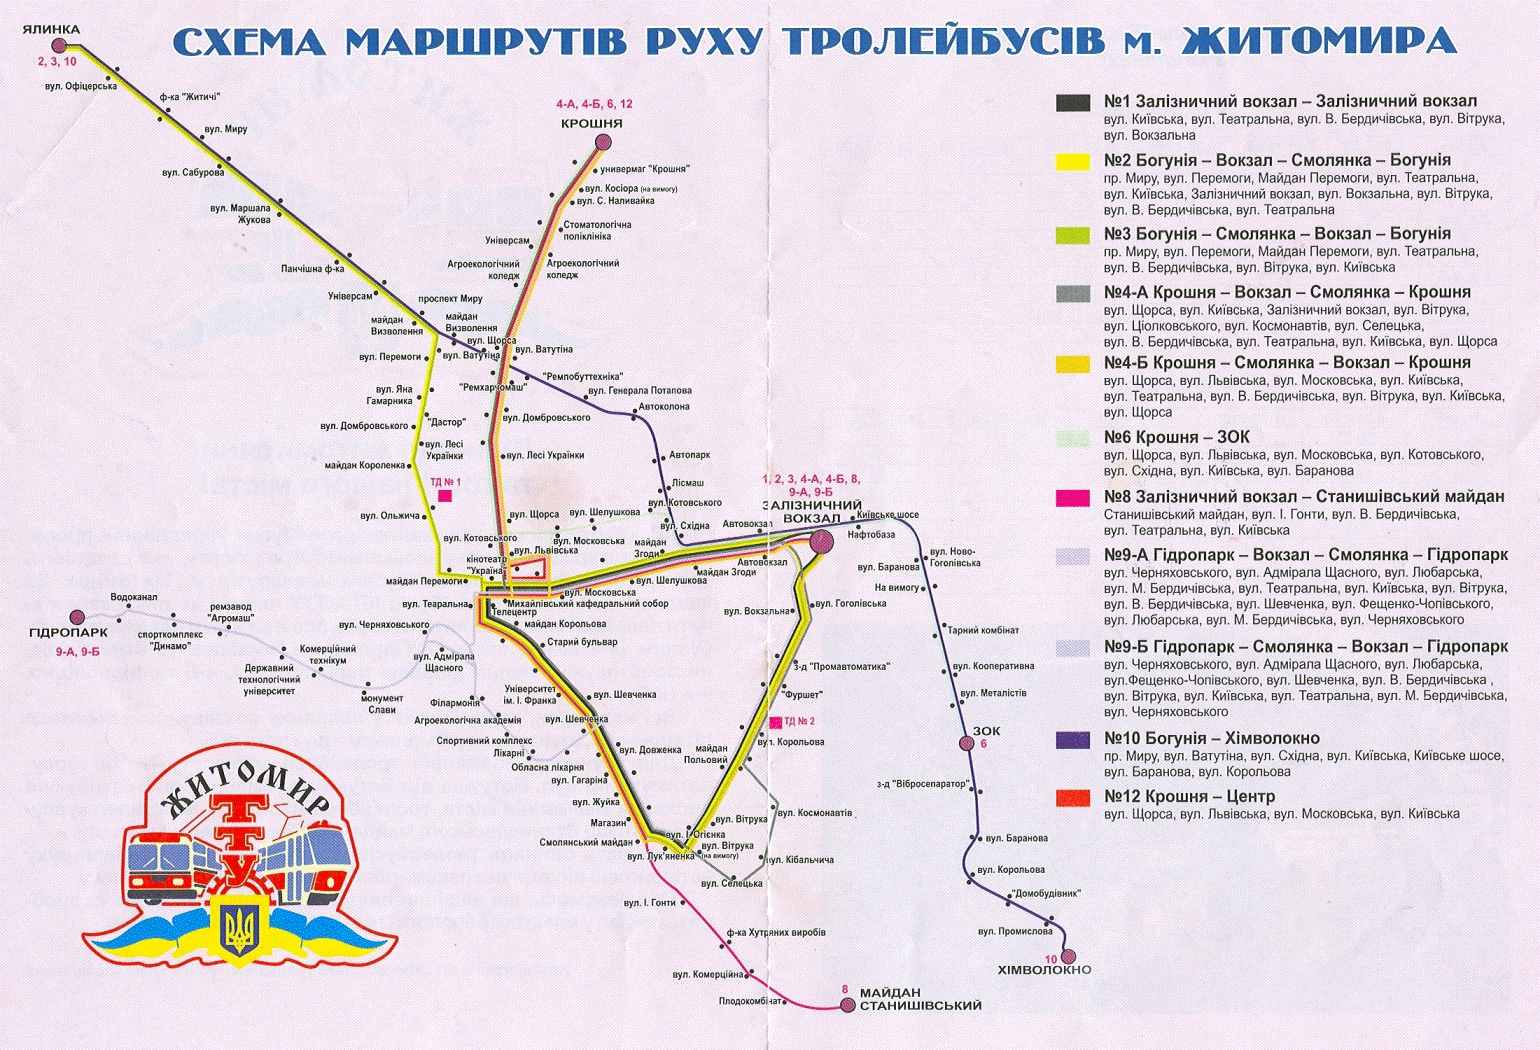 Zhytomyr — Tram (since 1975) and trolleybus routes